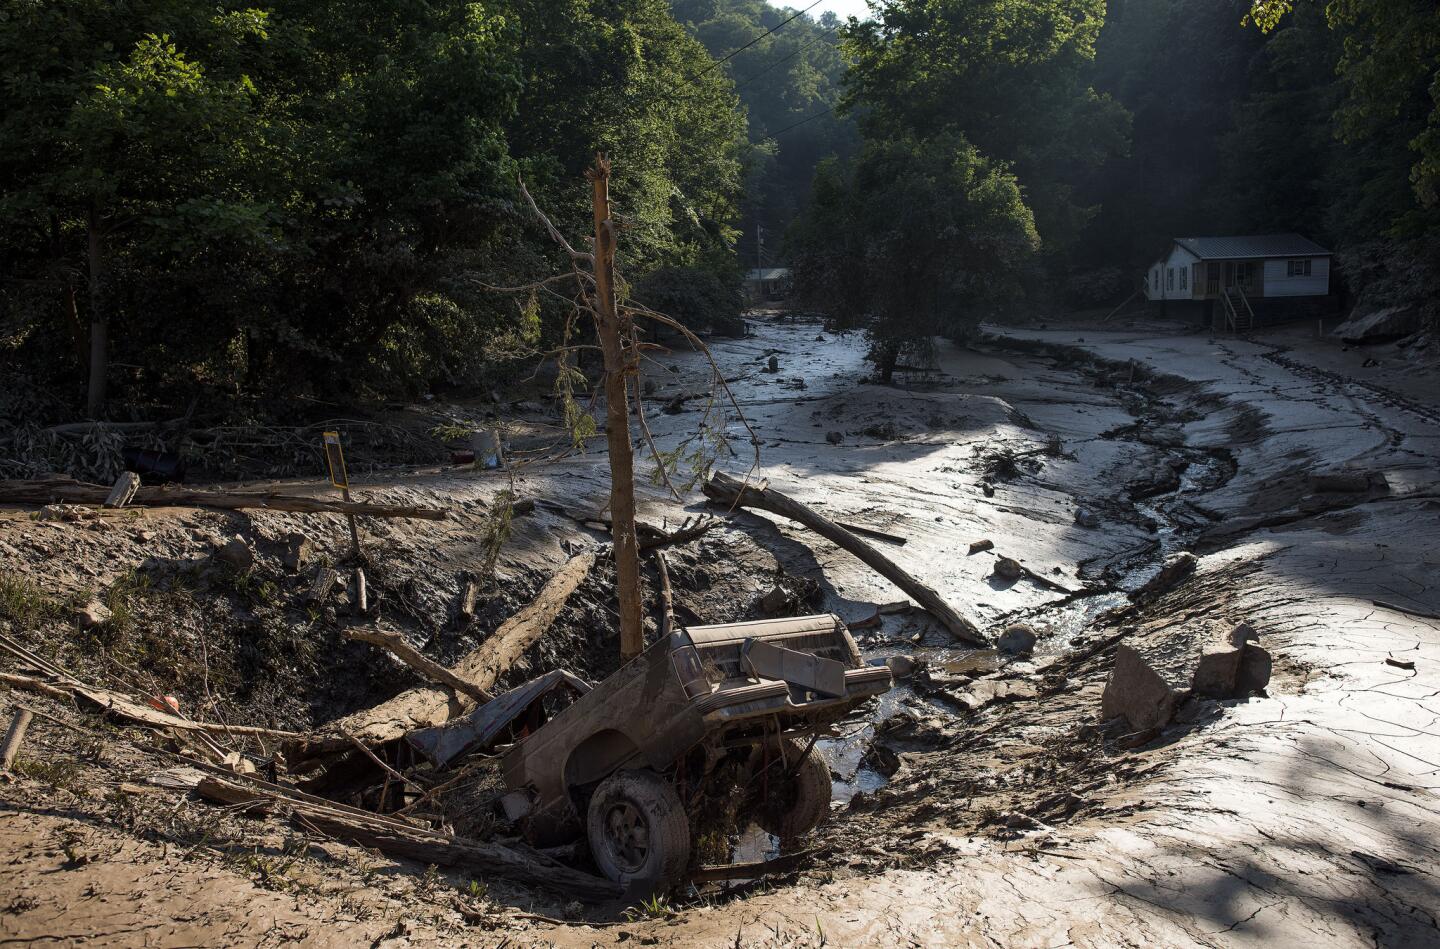 A truck lies in a hole amongst the mud after it was washed out of the driveway from the flooding on June 25, 2016, in Clendenin, West Virginia. T